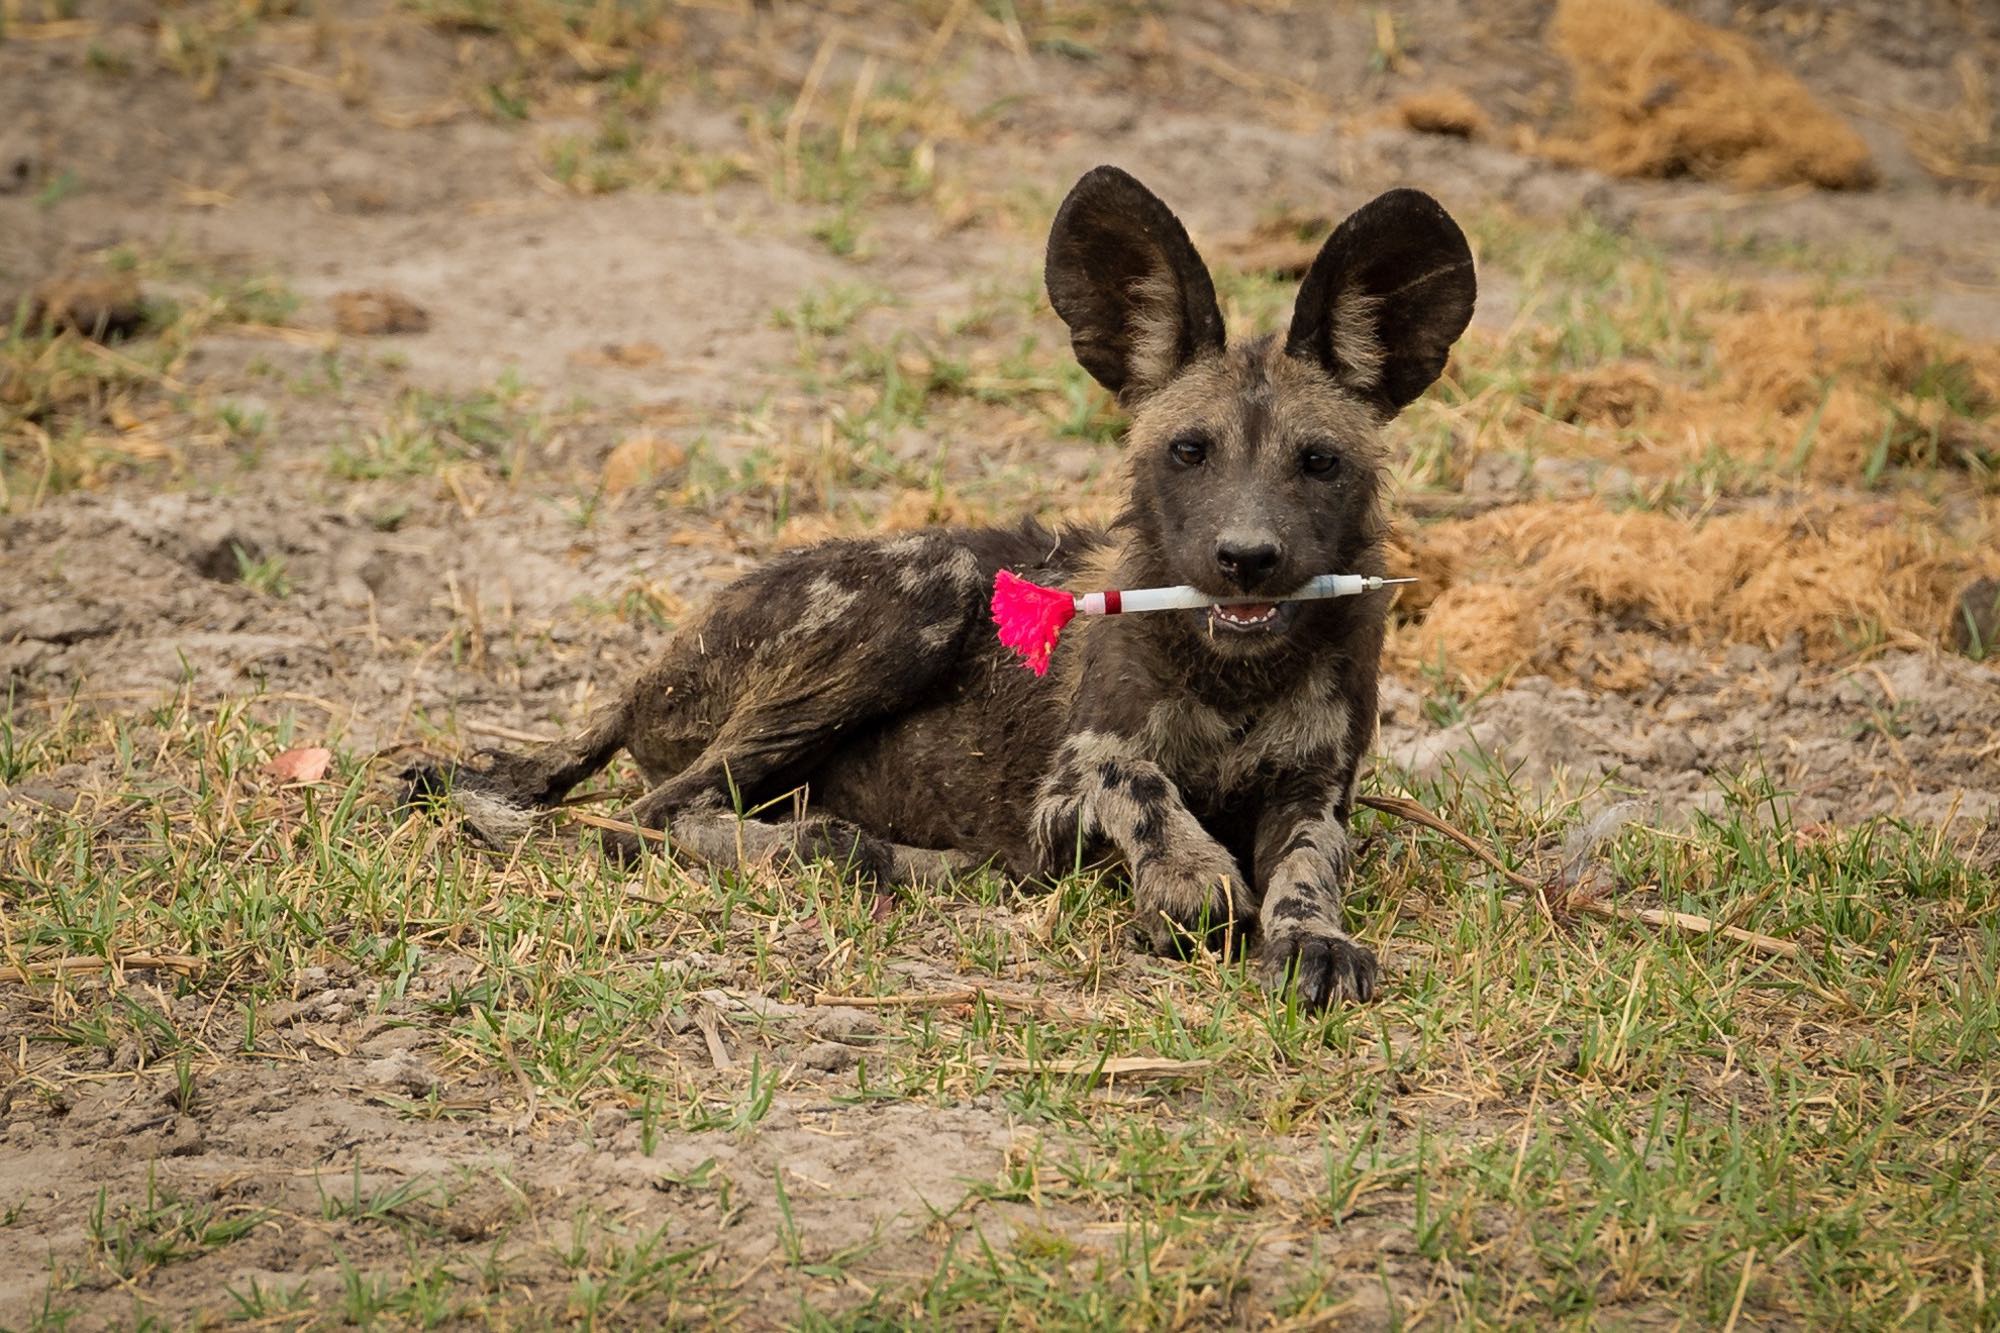 a photo of an African wild dog pup with a tranquiliser dart in its mouth